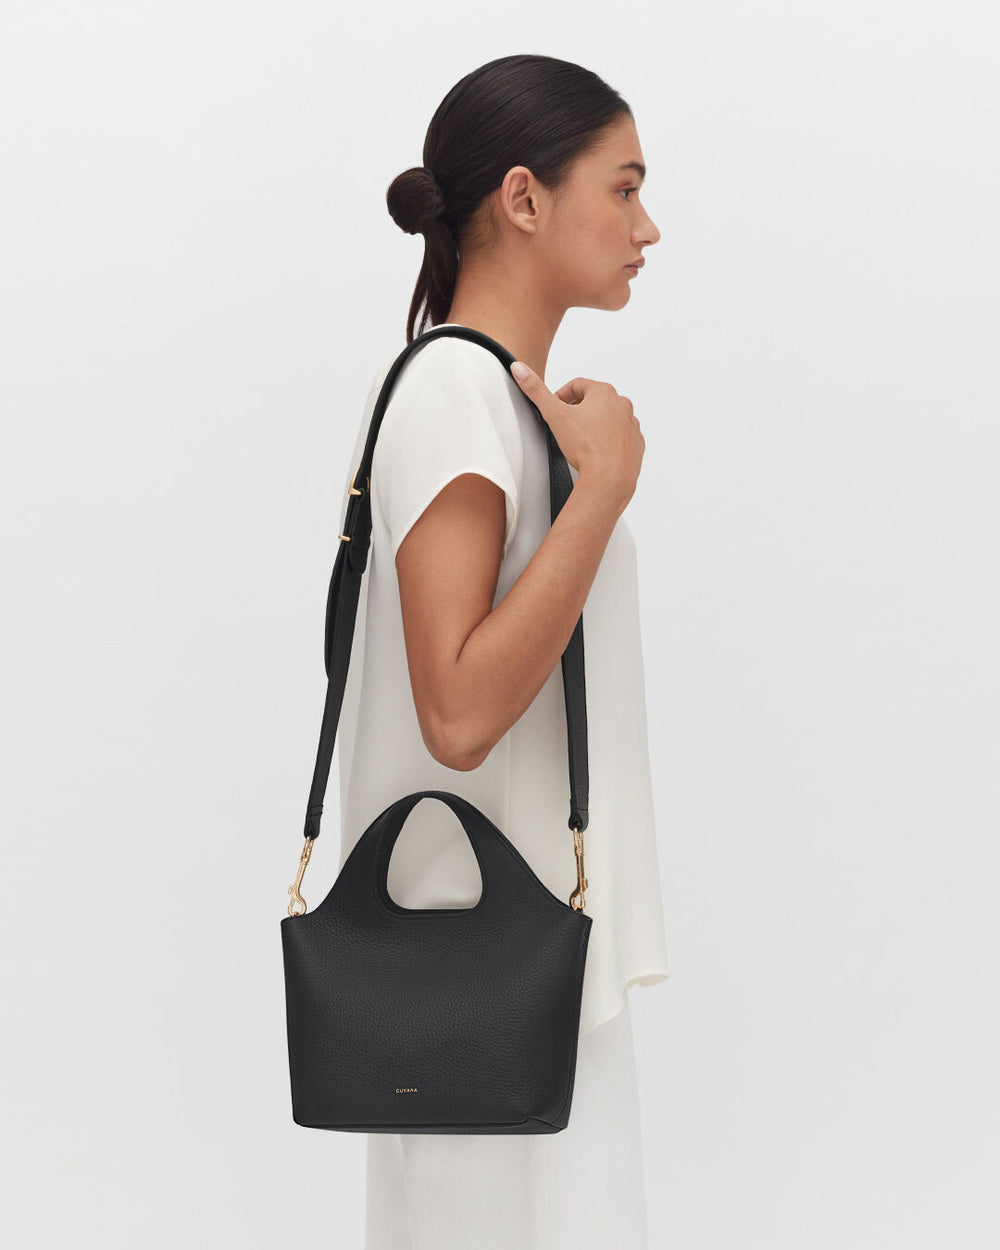 Woman with bag over shoulder looking to the side.